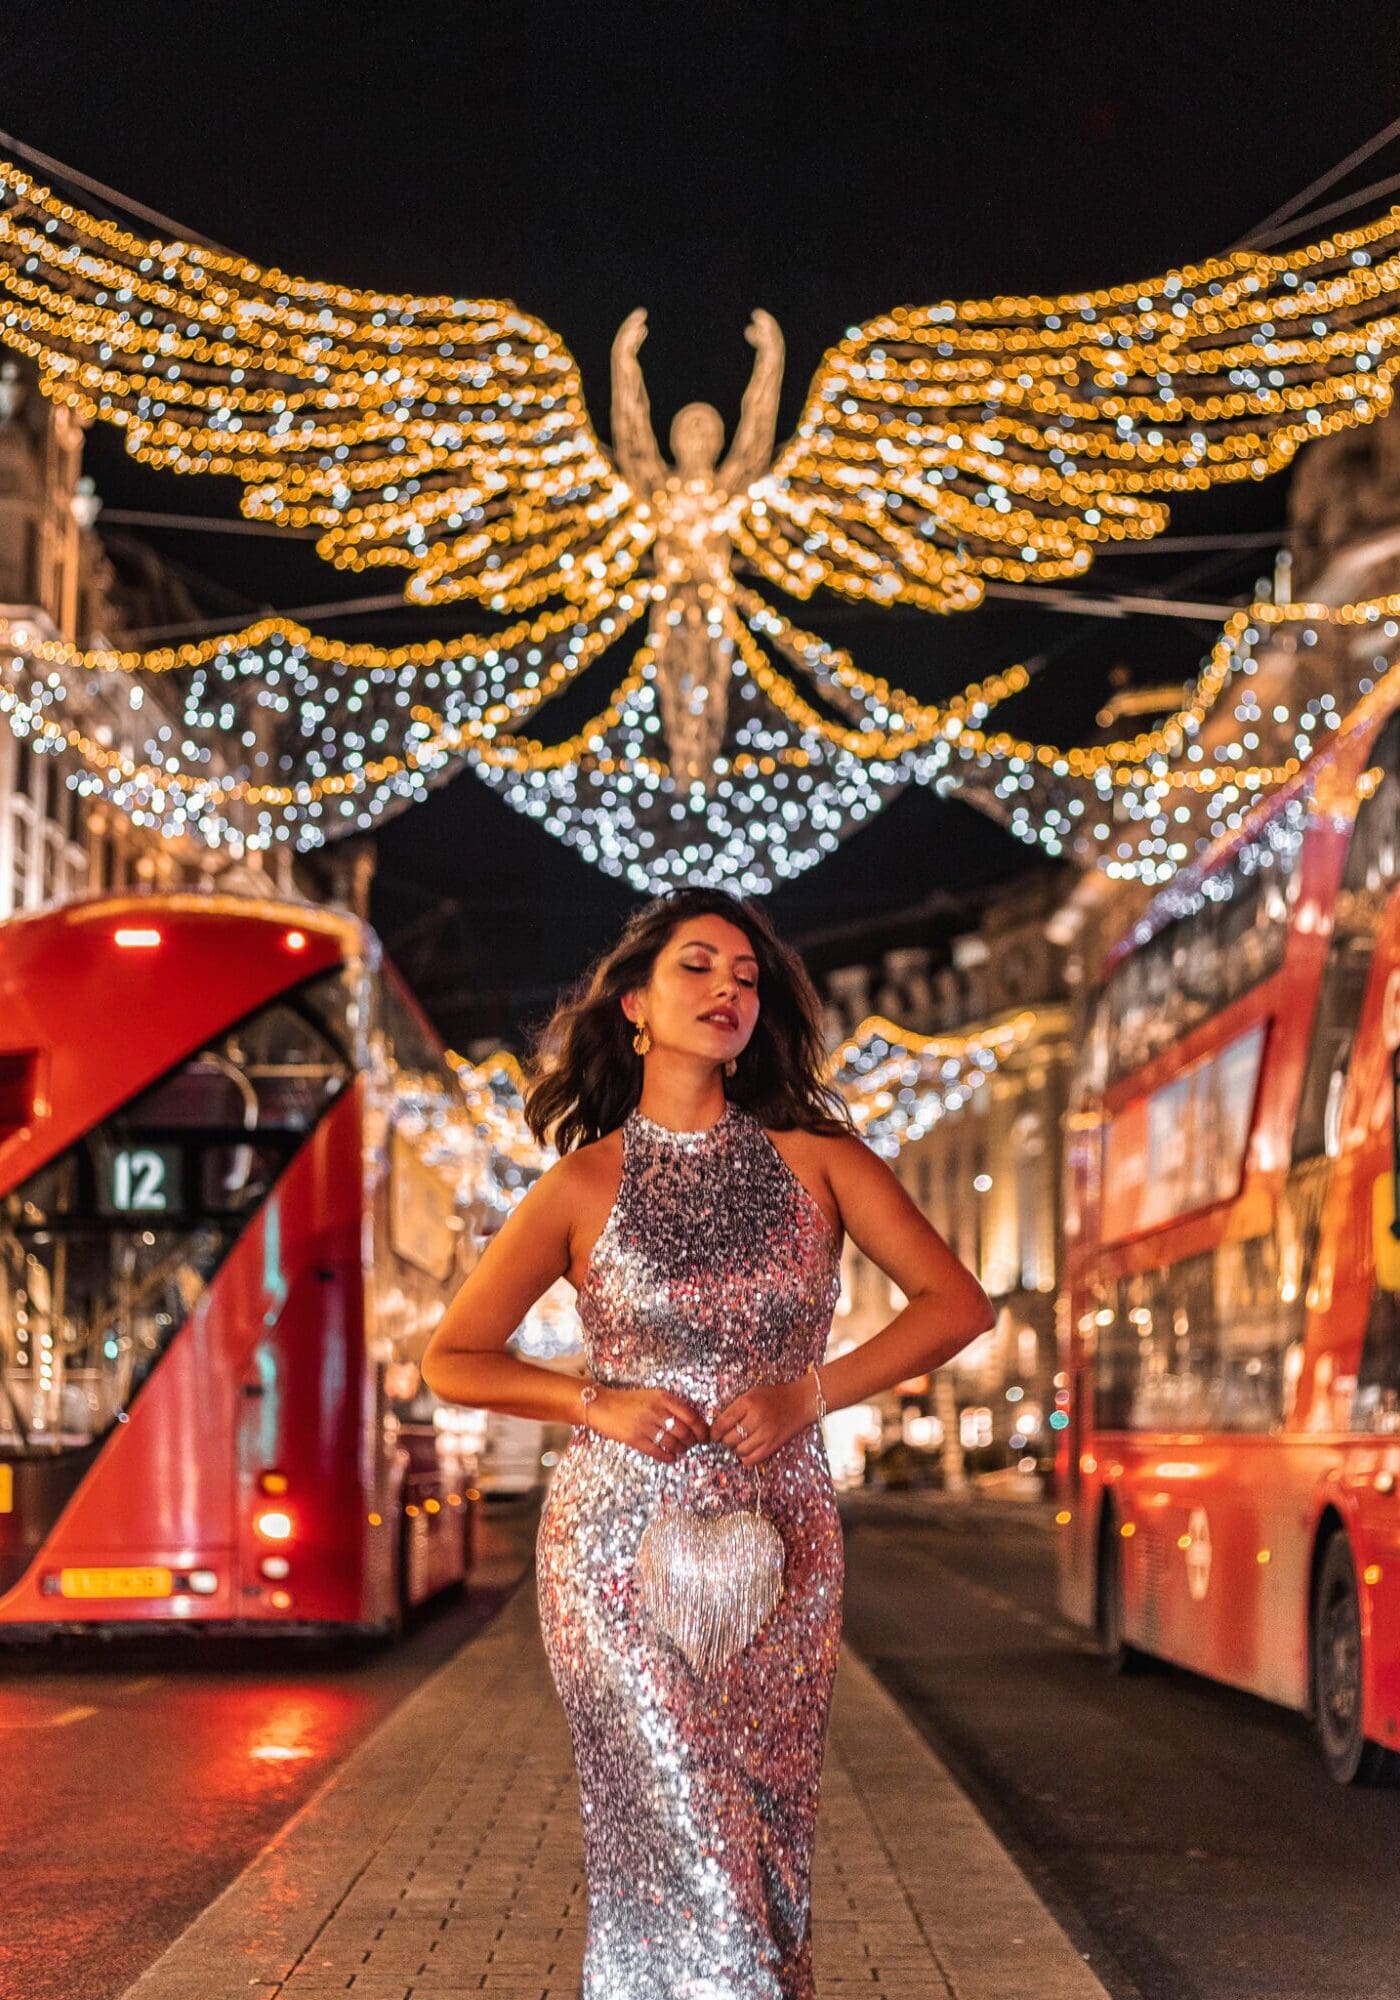 Christmas in London Instagrammable Places 2022